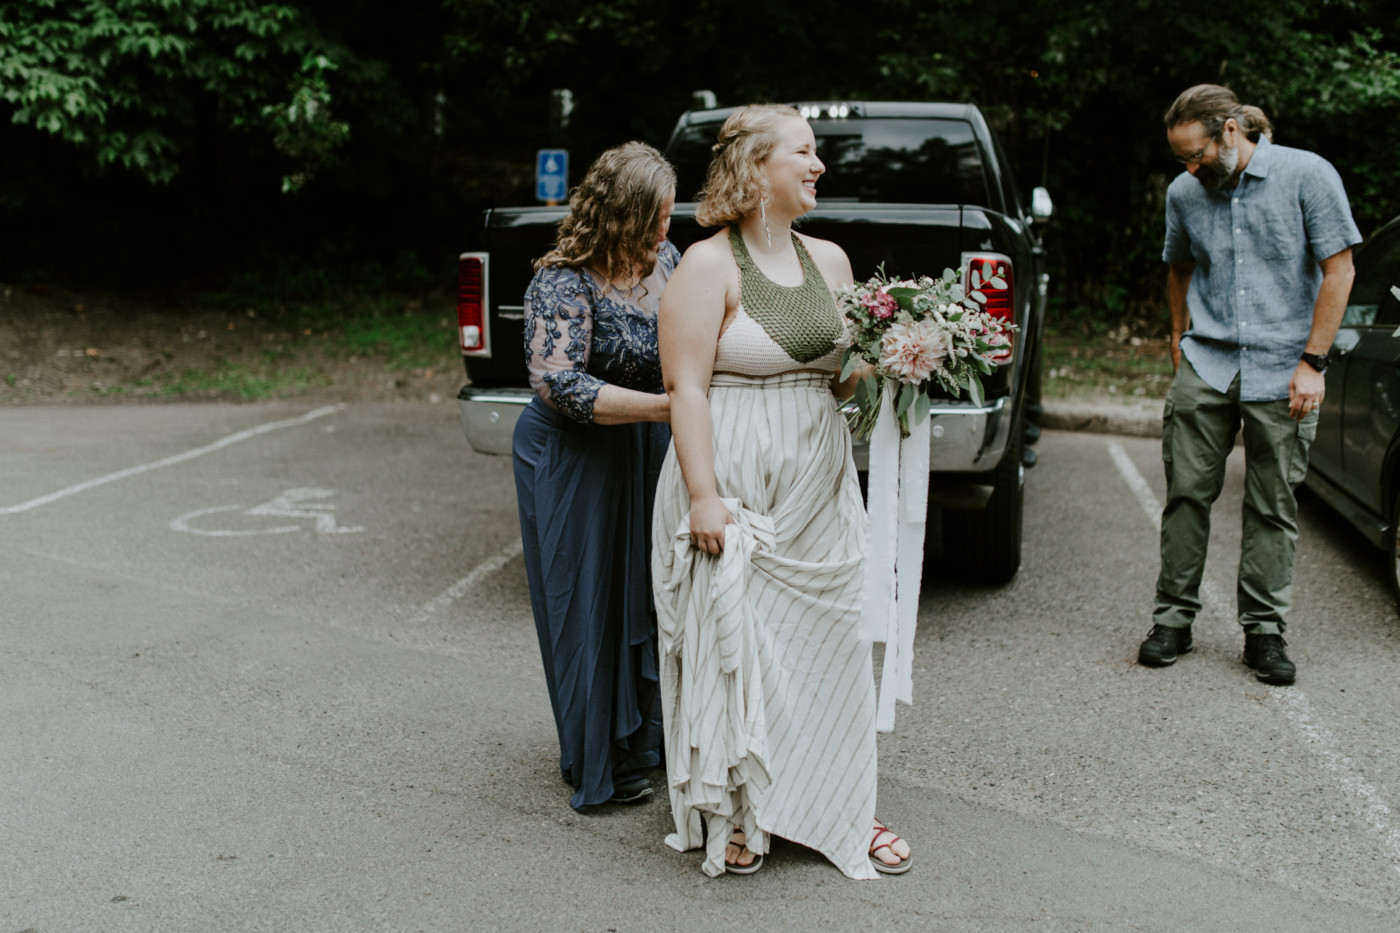 Kate's mom helps her with her wedding dress. Elopement wedding photography at Bridal Veil Falls by Sienna Plus Josh.